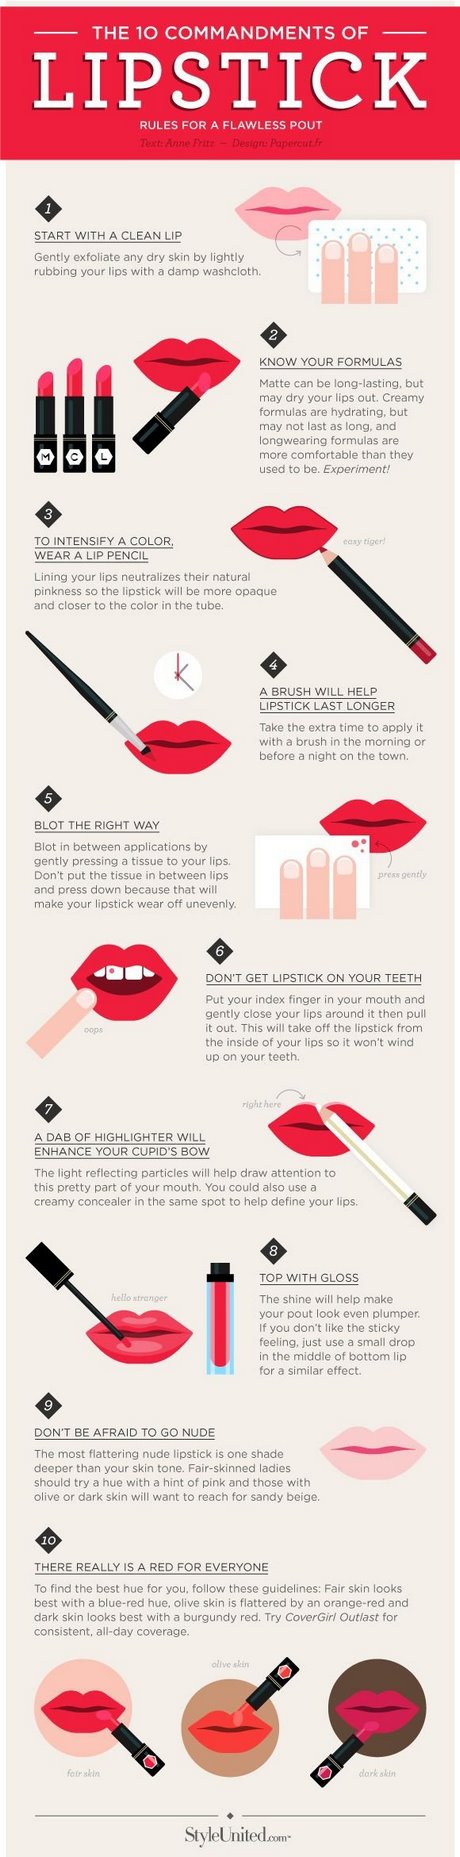 makeup-tutorial-infographic-95 Make-up tutorial infographic